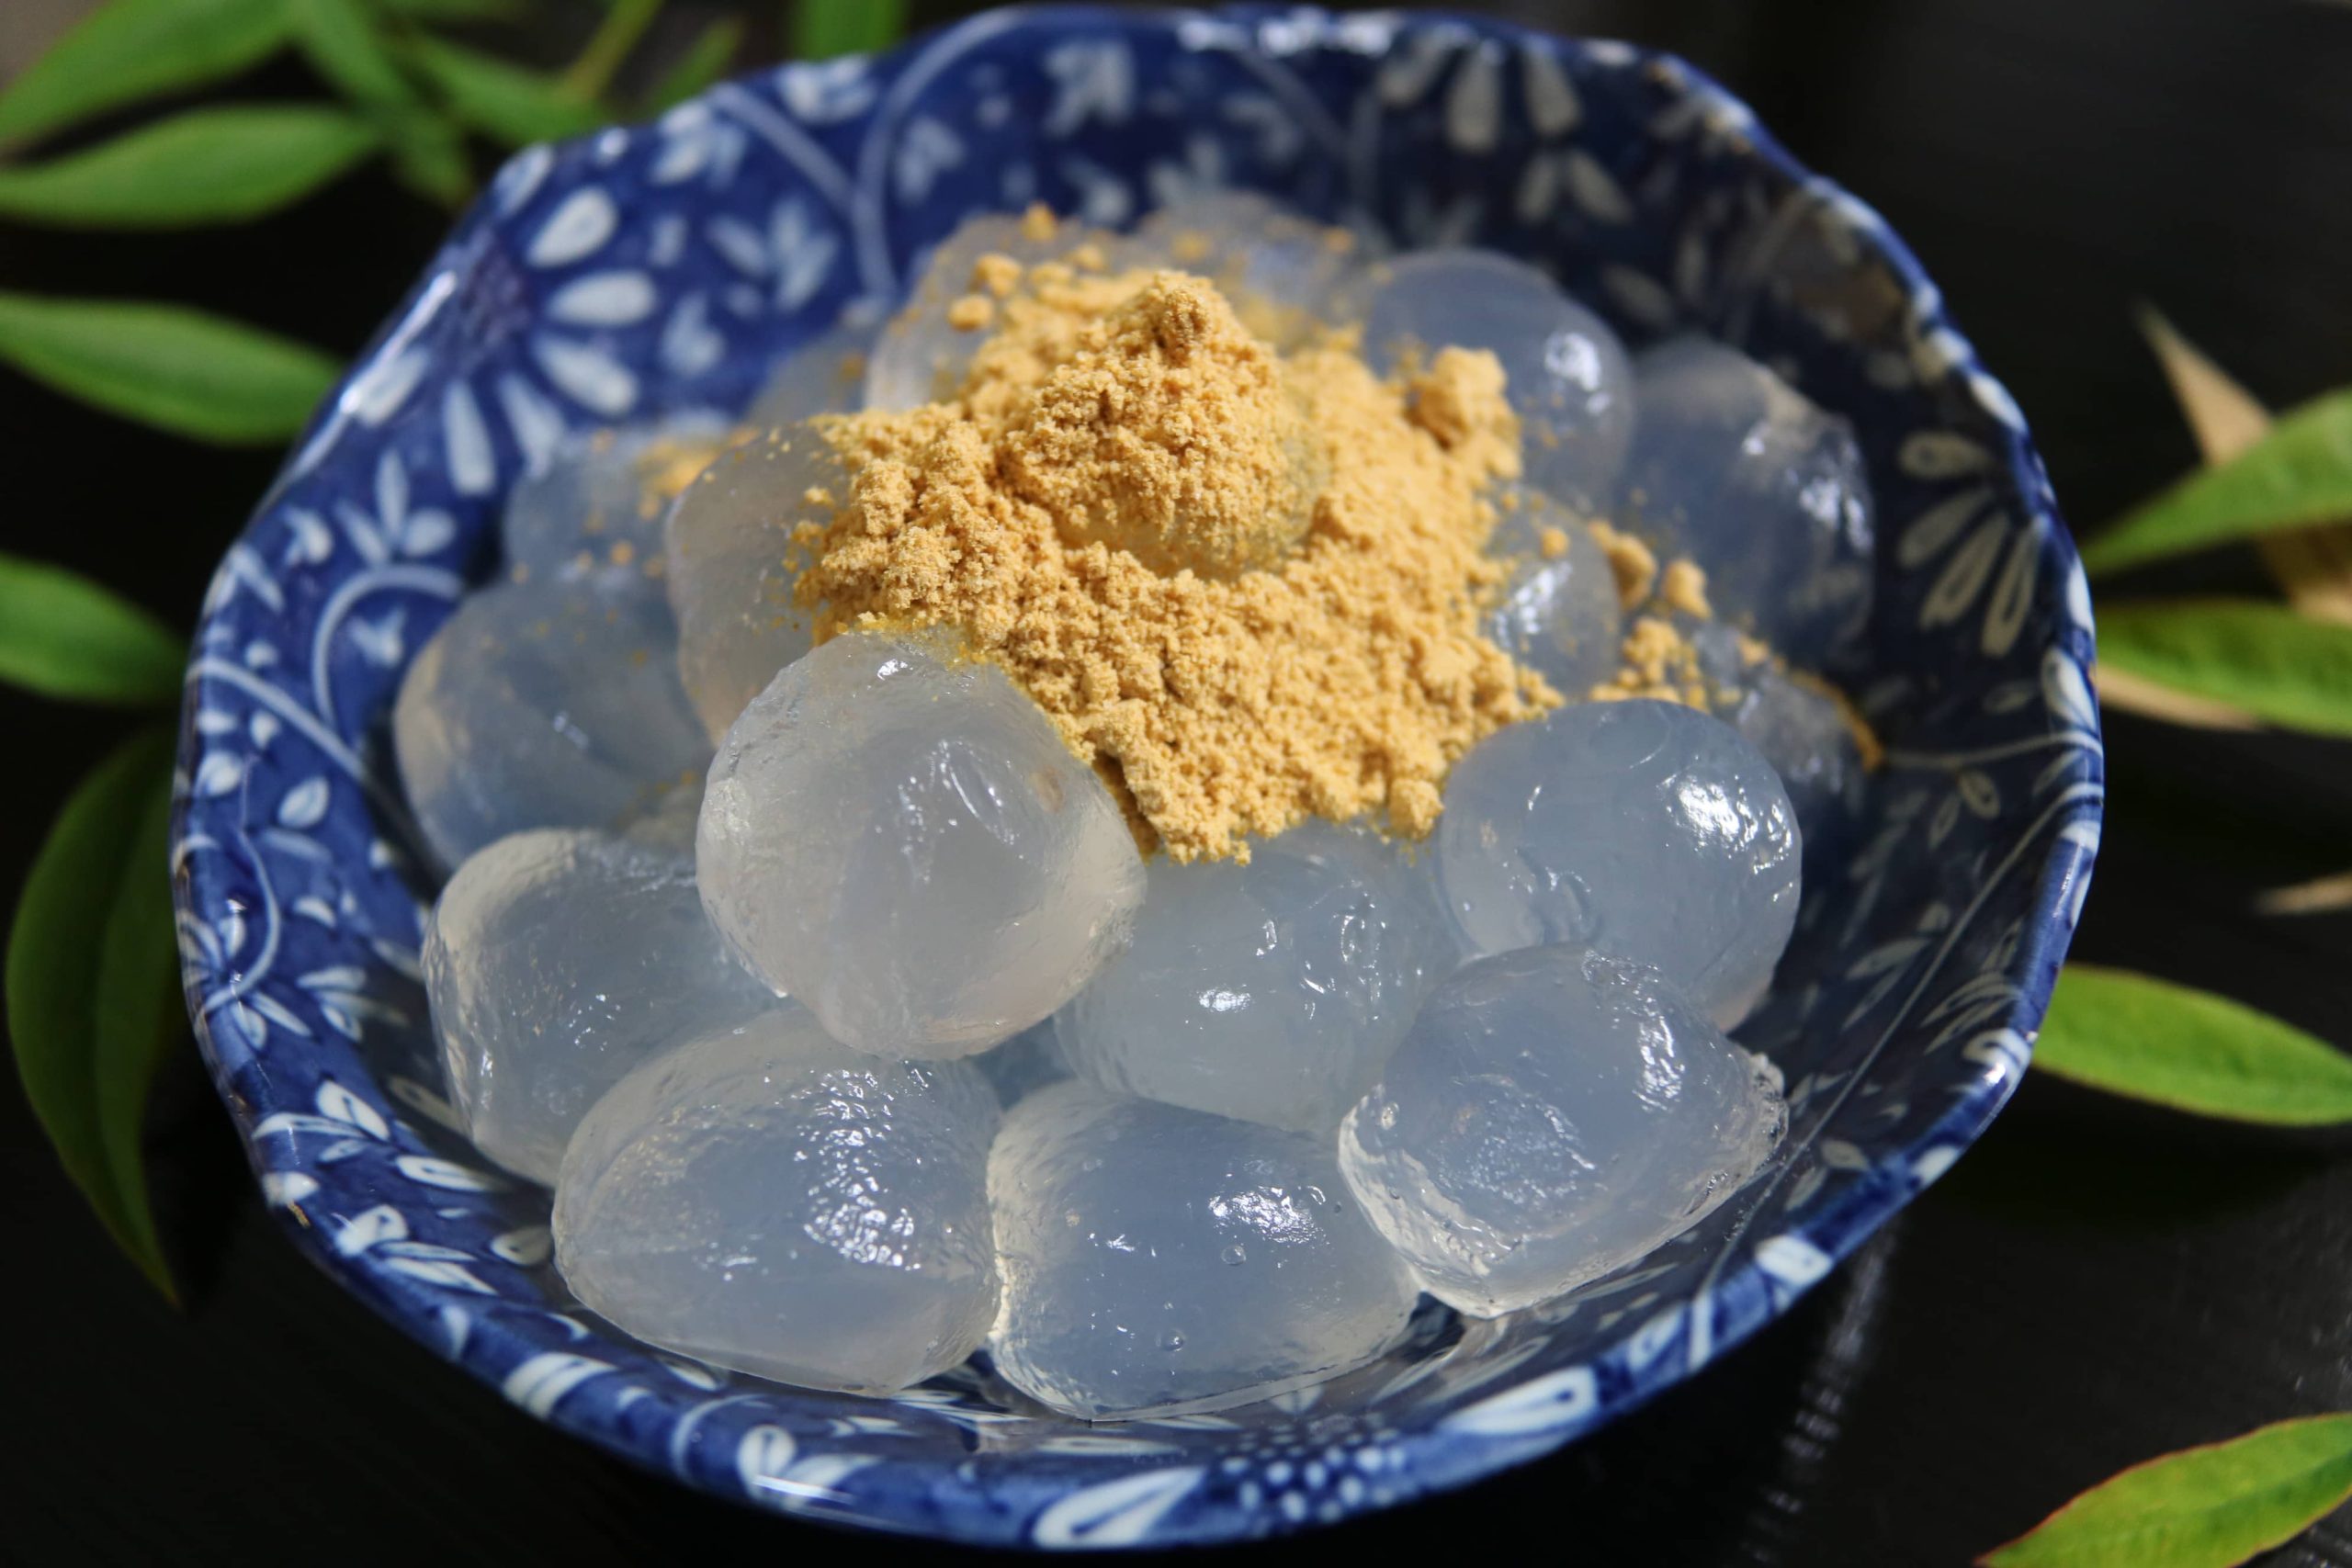 Bowl filled with glossy warabi mochi spheres topped with golden sweet soy bean powder